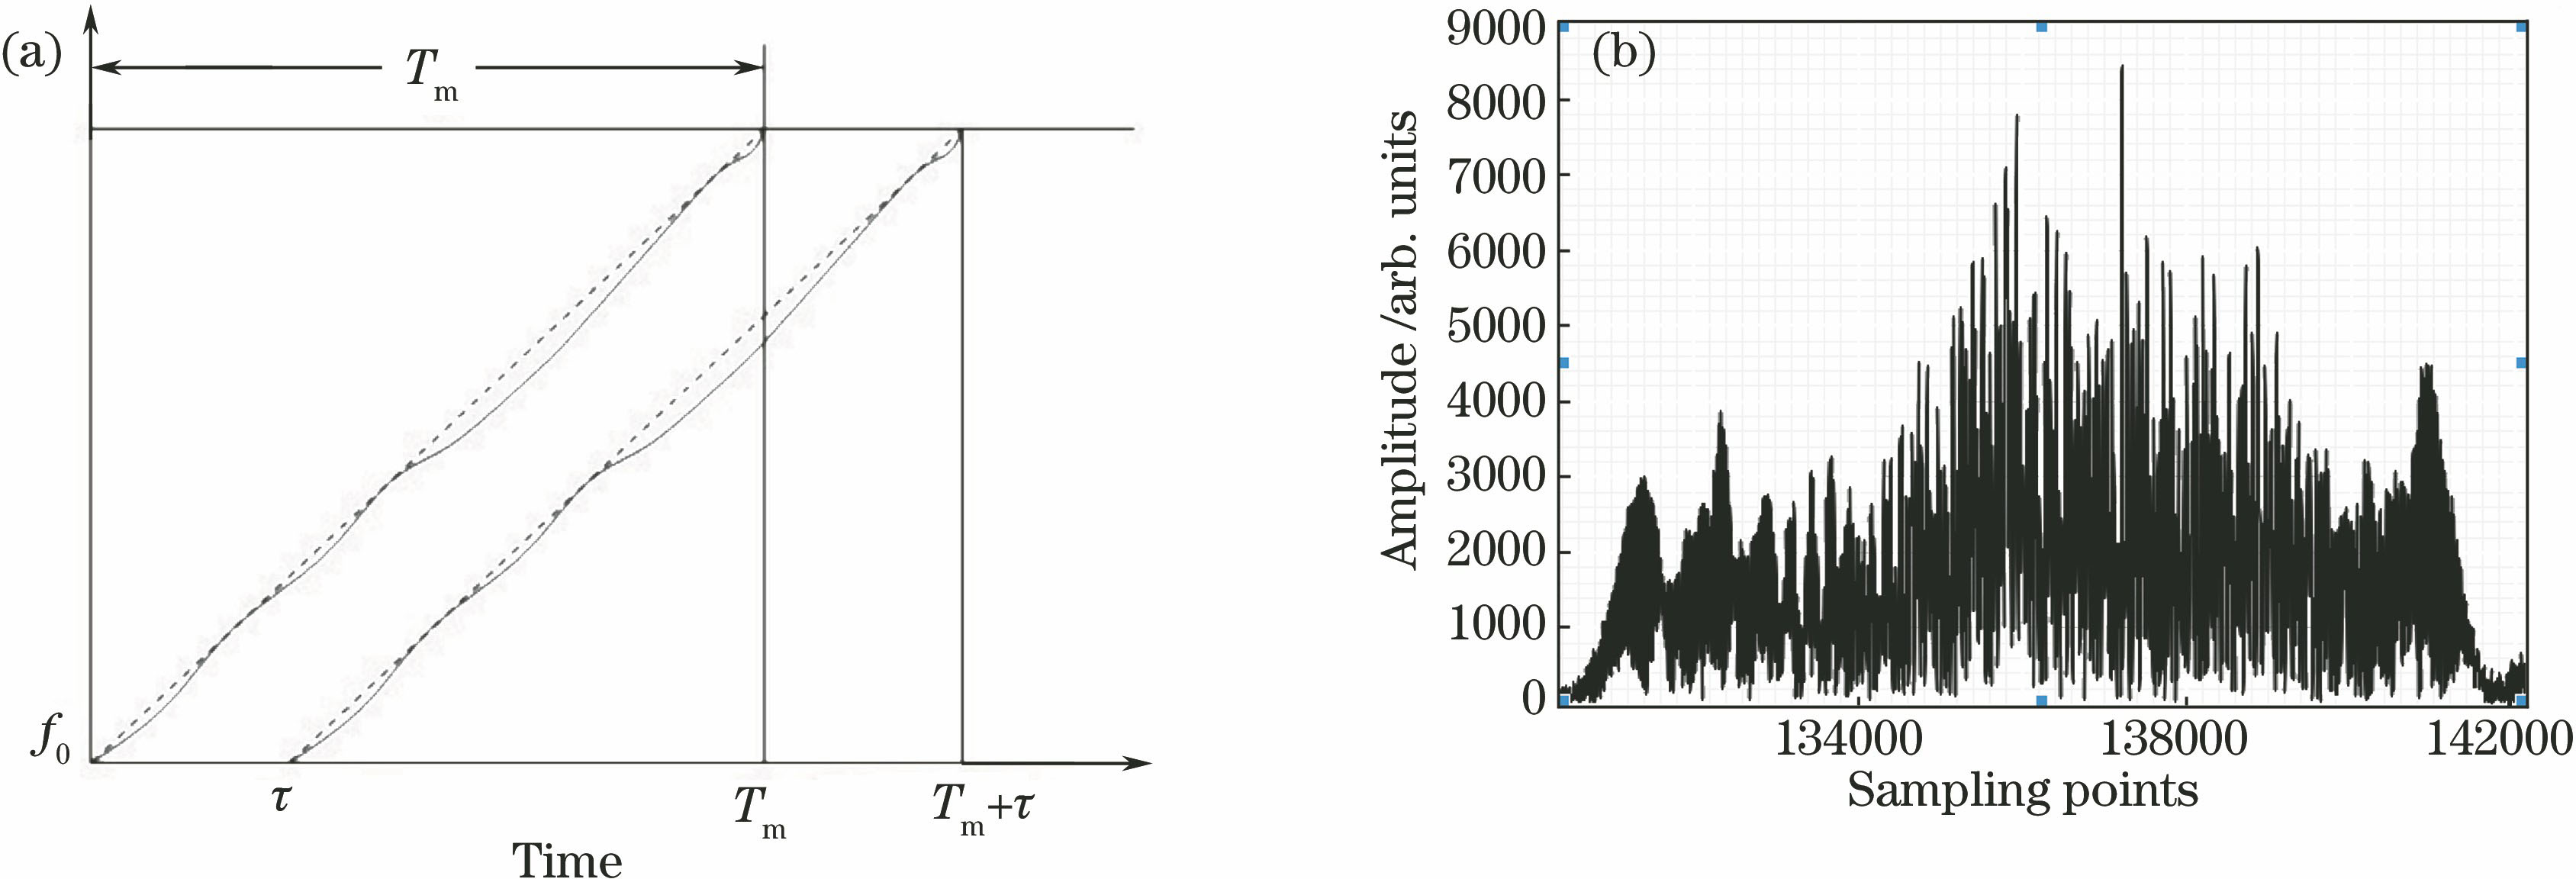 (a) Curves of modulated frequency versus time; (b) a serious broadened spectrum signal